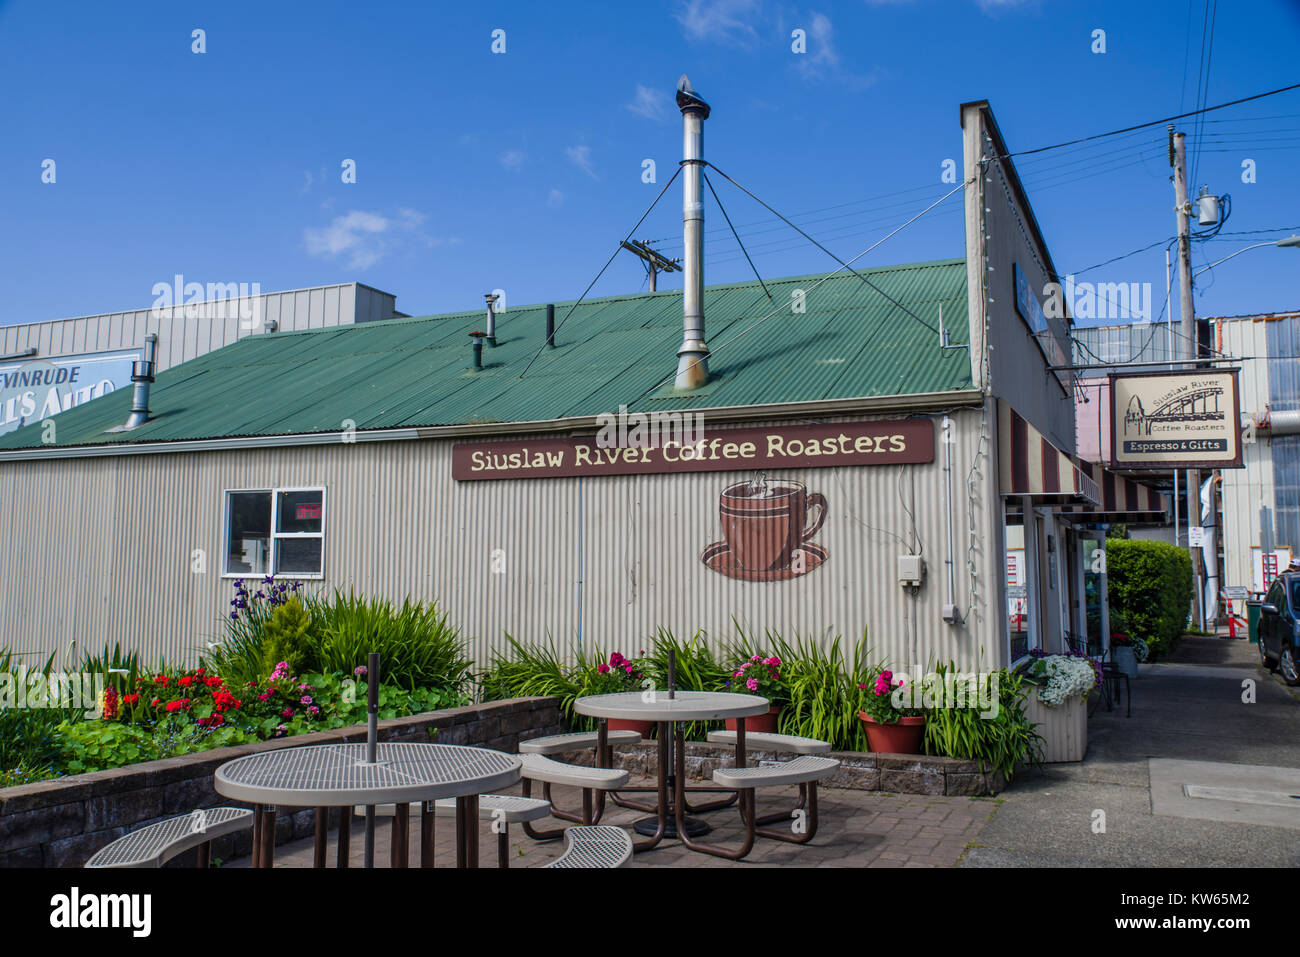 Siuslaw River Coffee Roasters building in FLorence, Oregon, USA Stock Photo